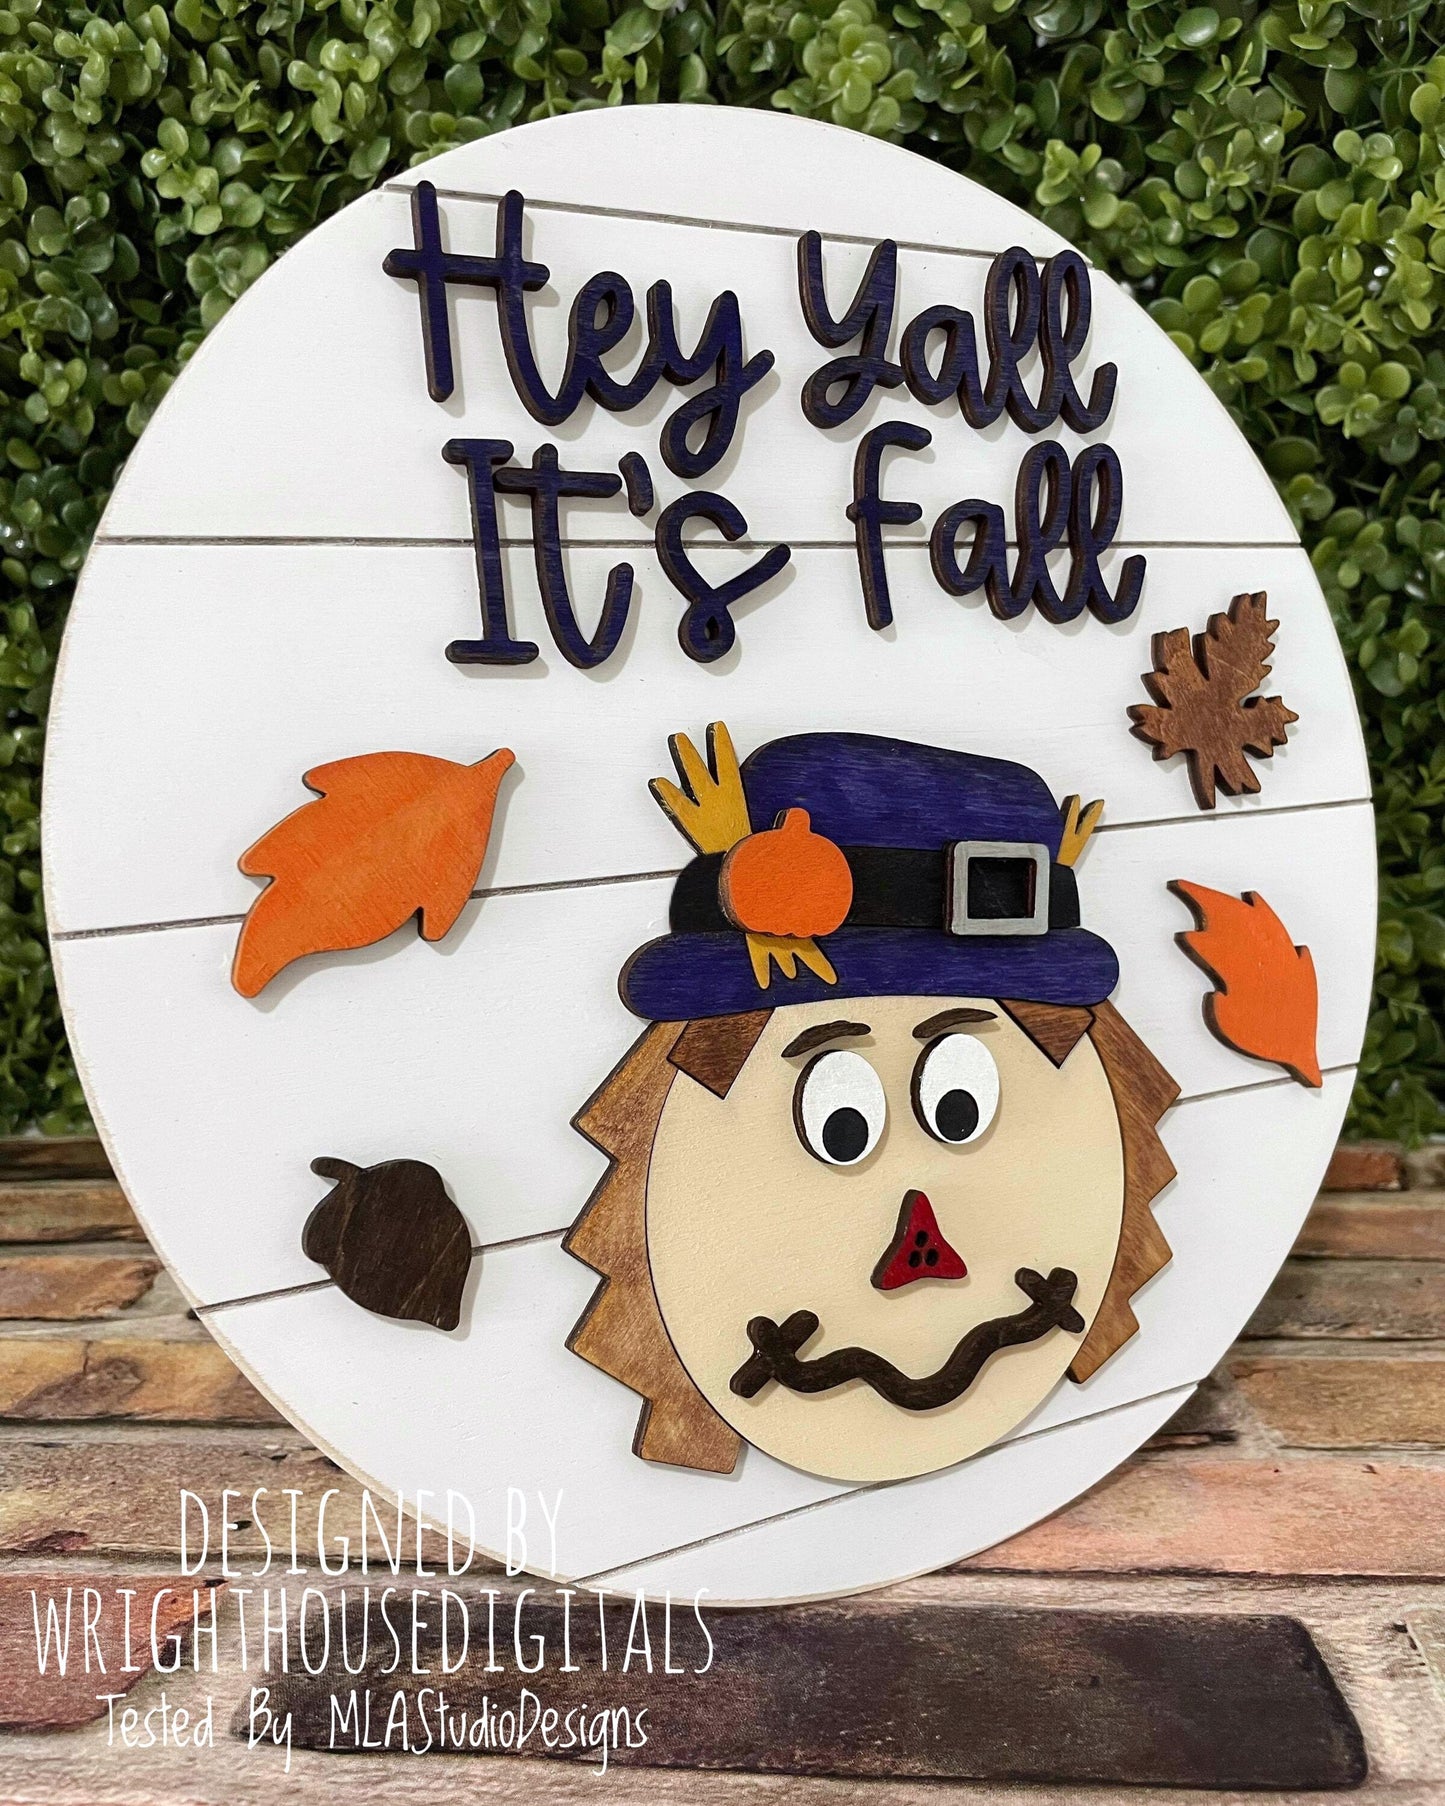 Hey Y'all It's Fall Scarecrow Autumn Door Hanger Round - Seasonal Sign Making and DIY Kits - Cut File For Glowforge Laser - Digital SVG File